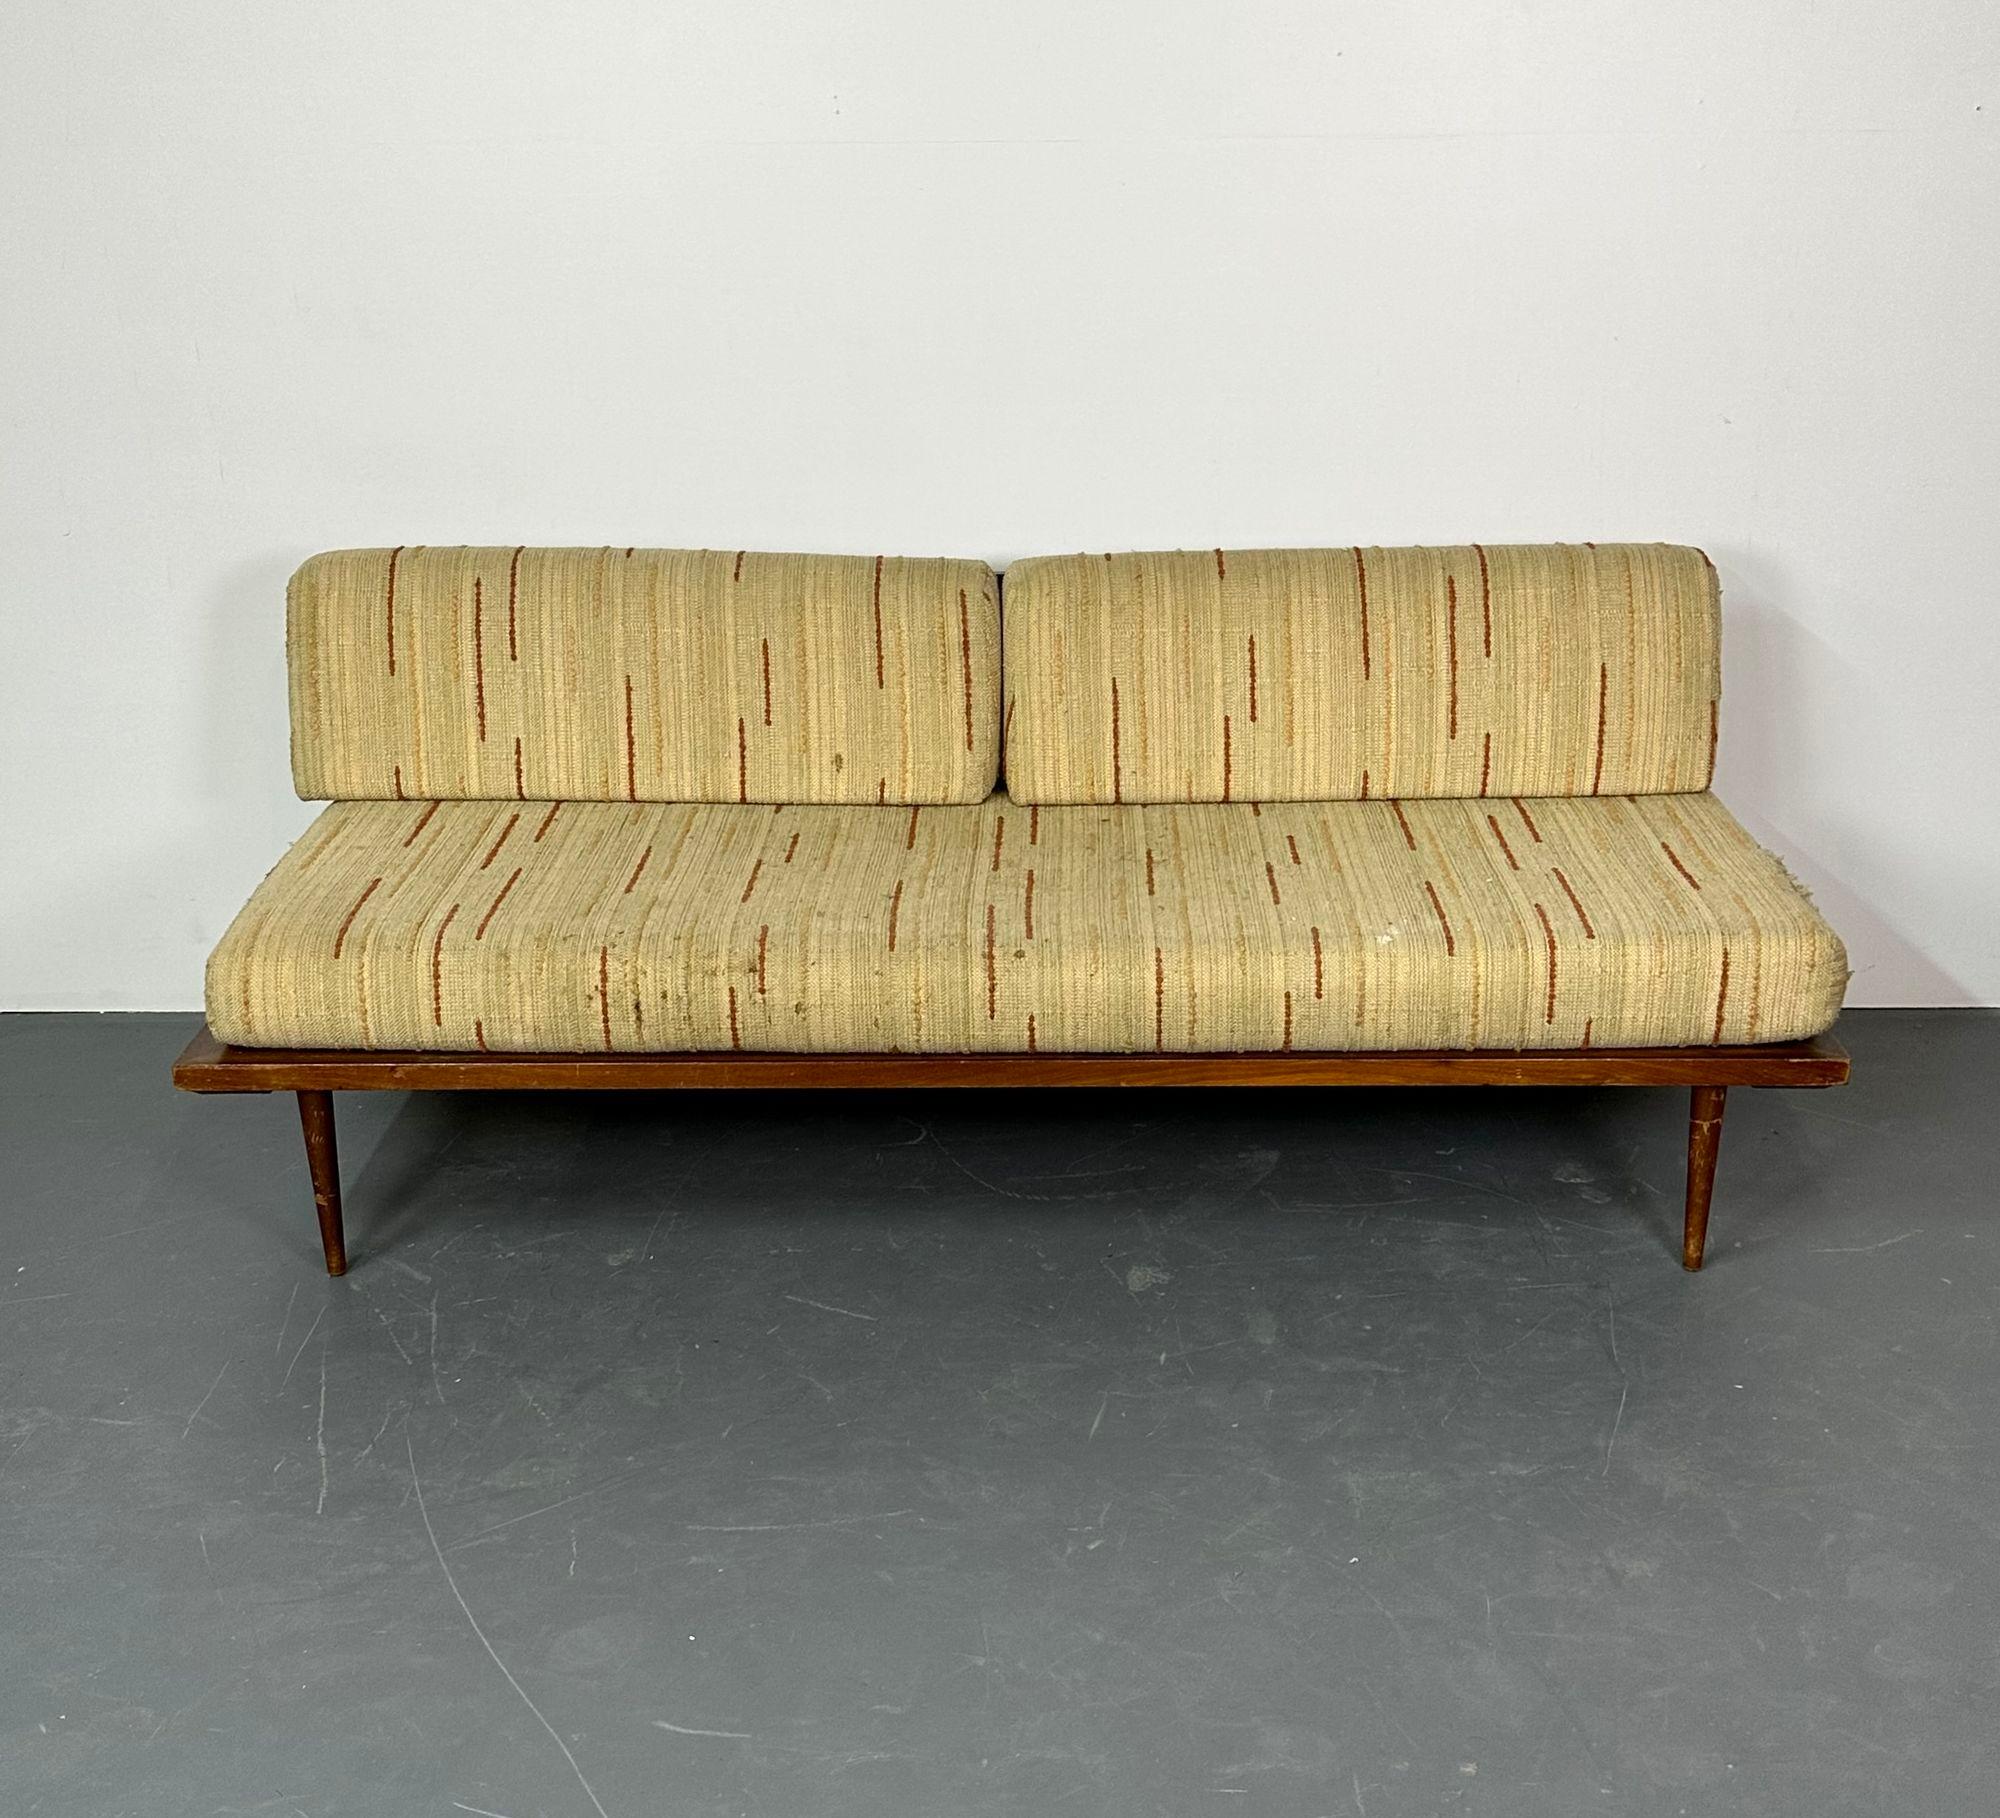 Mid-Century Modern Peter Hvidt & Orla Molgaard Sofa / Daybed, Danish 1960s
 
Danish modern sofa by Peter Hvidt & Orla Molgaard. Entire set available, inquire for additional pricing. 
 
27.75 H x 75 W x 30 D SH 17.5 inches